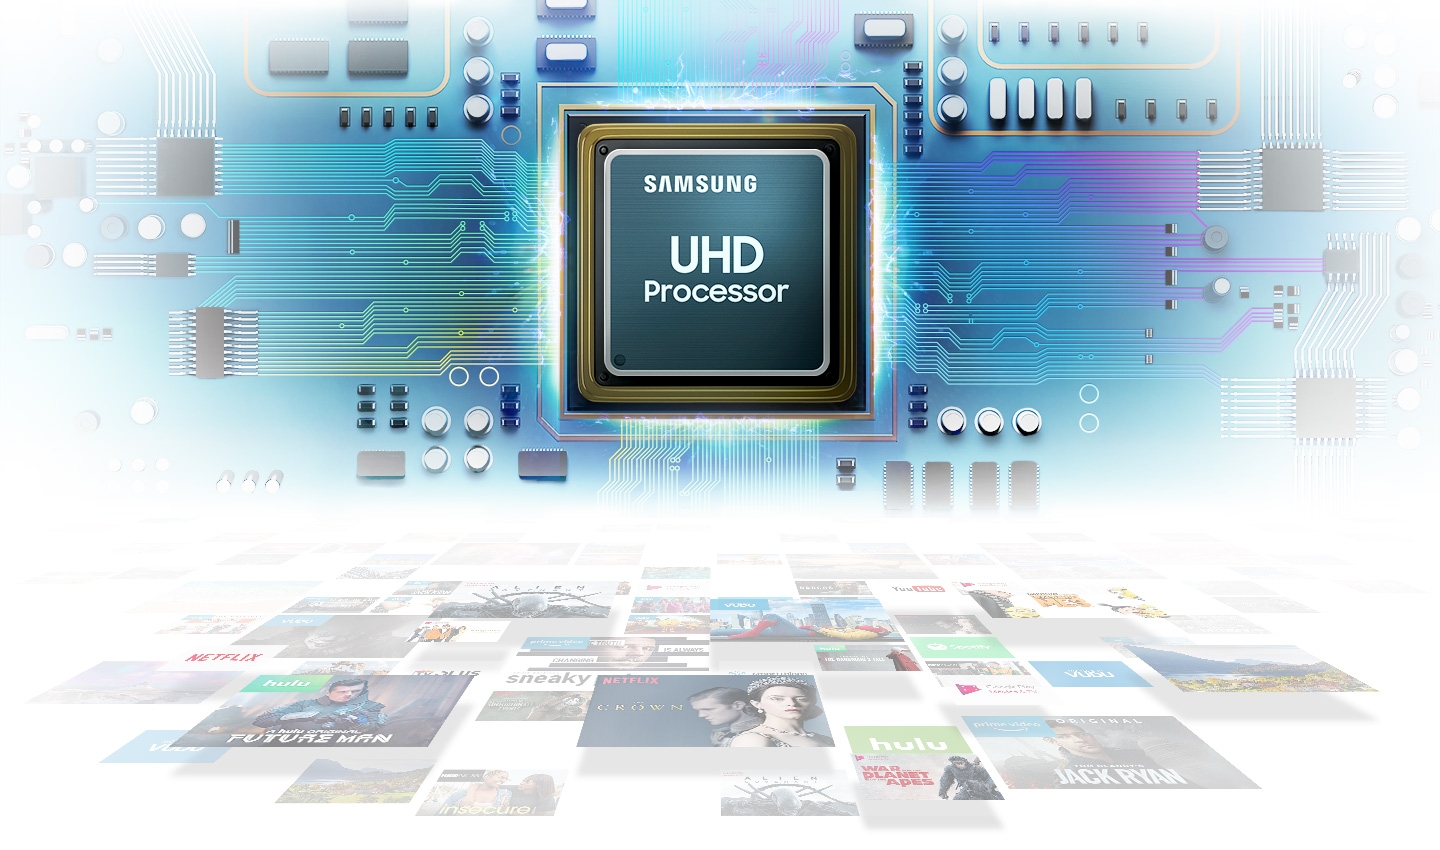 UHD processor, powerful picture quality